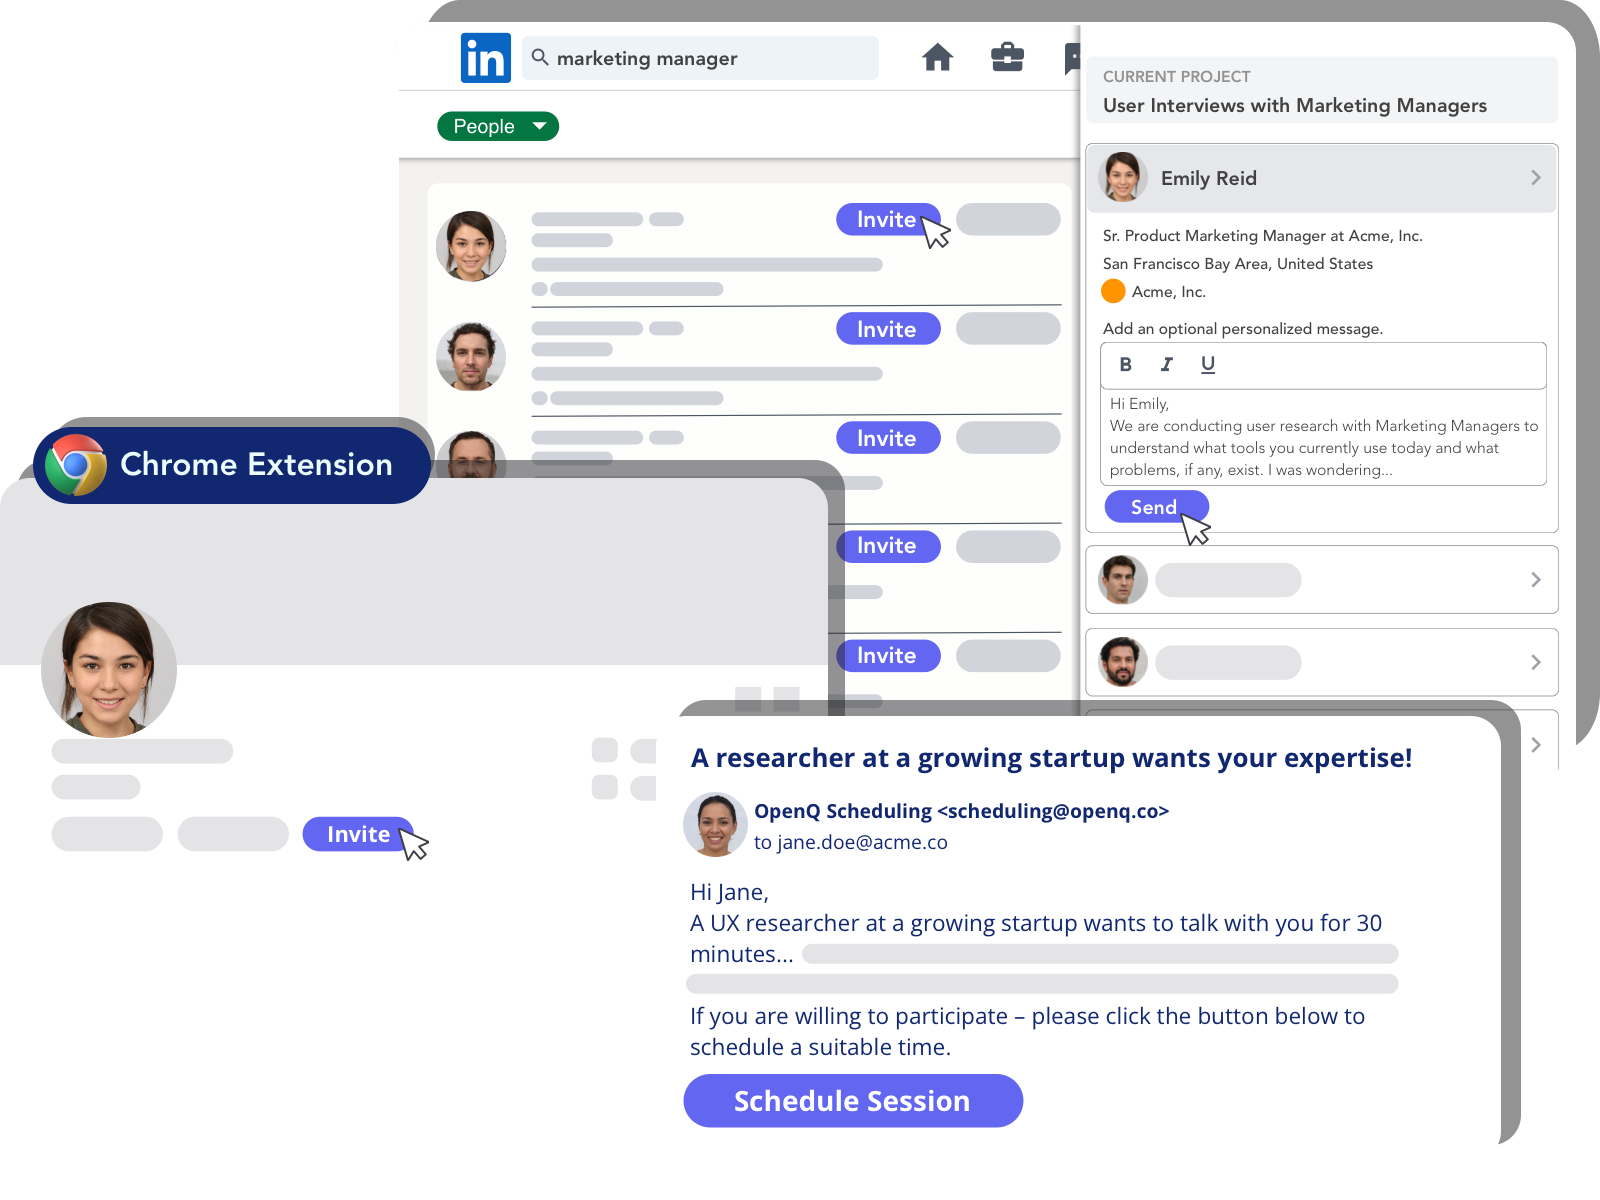 OpenQ Recruiter browser extension for Chrome and Edge helps you find and recruit relevant prospective users for user research, customer development and startup sales.